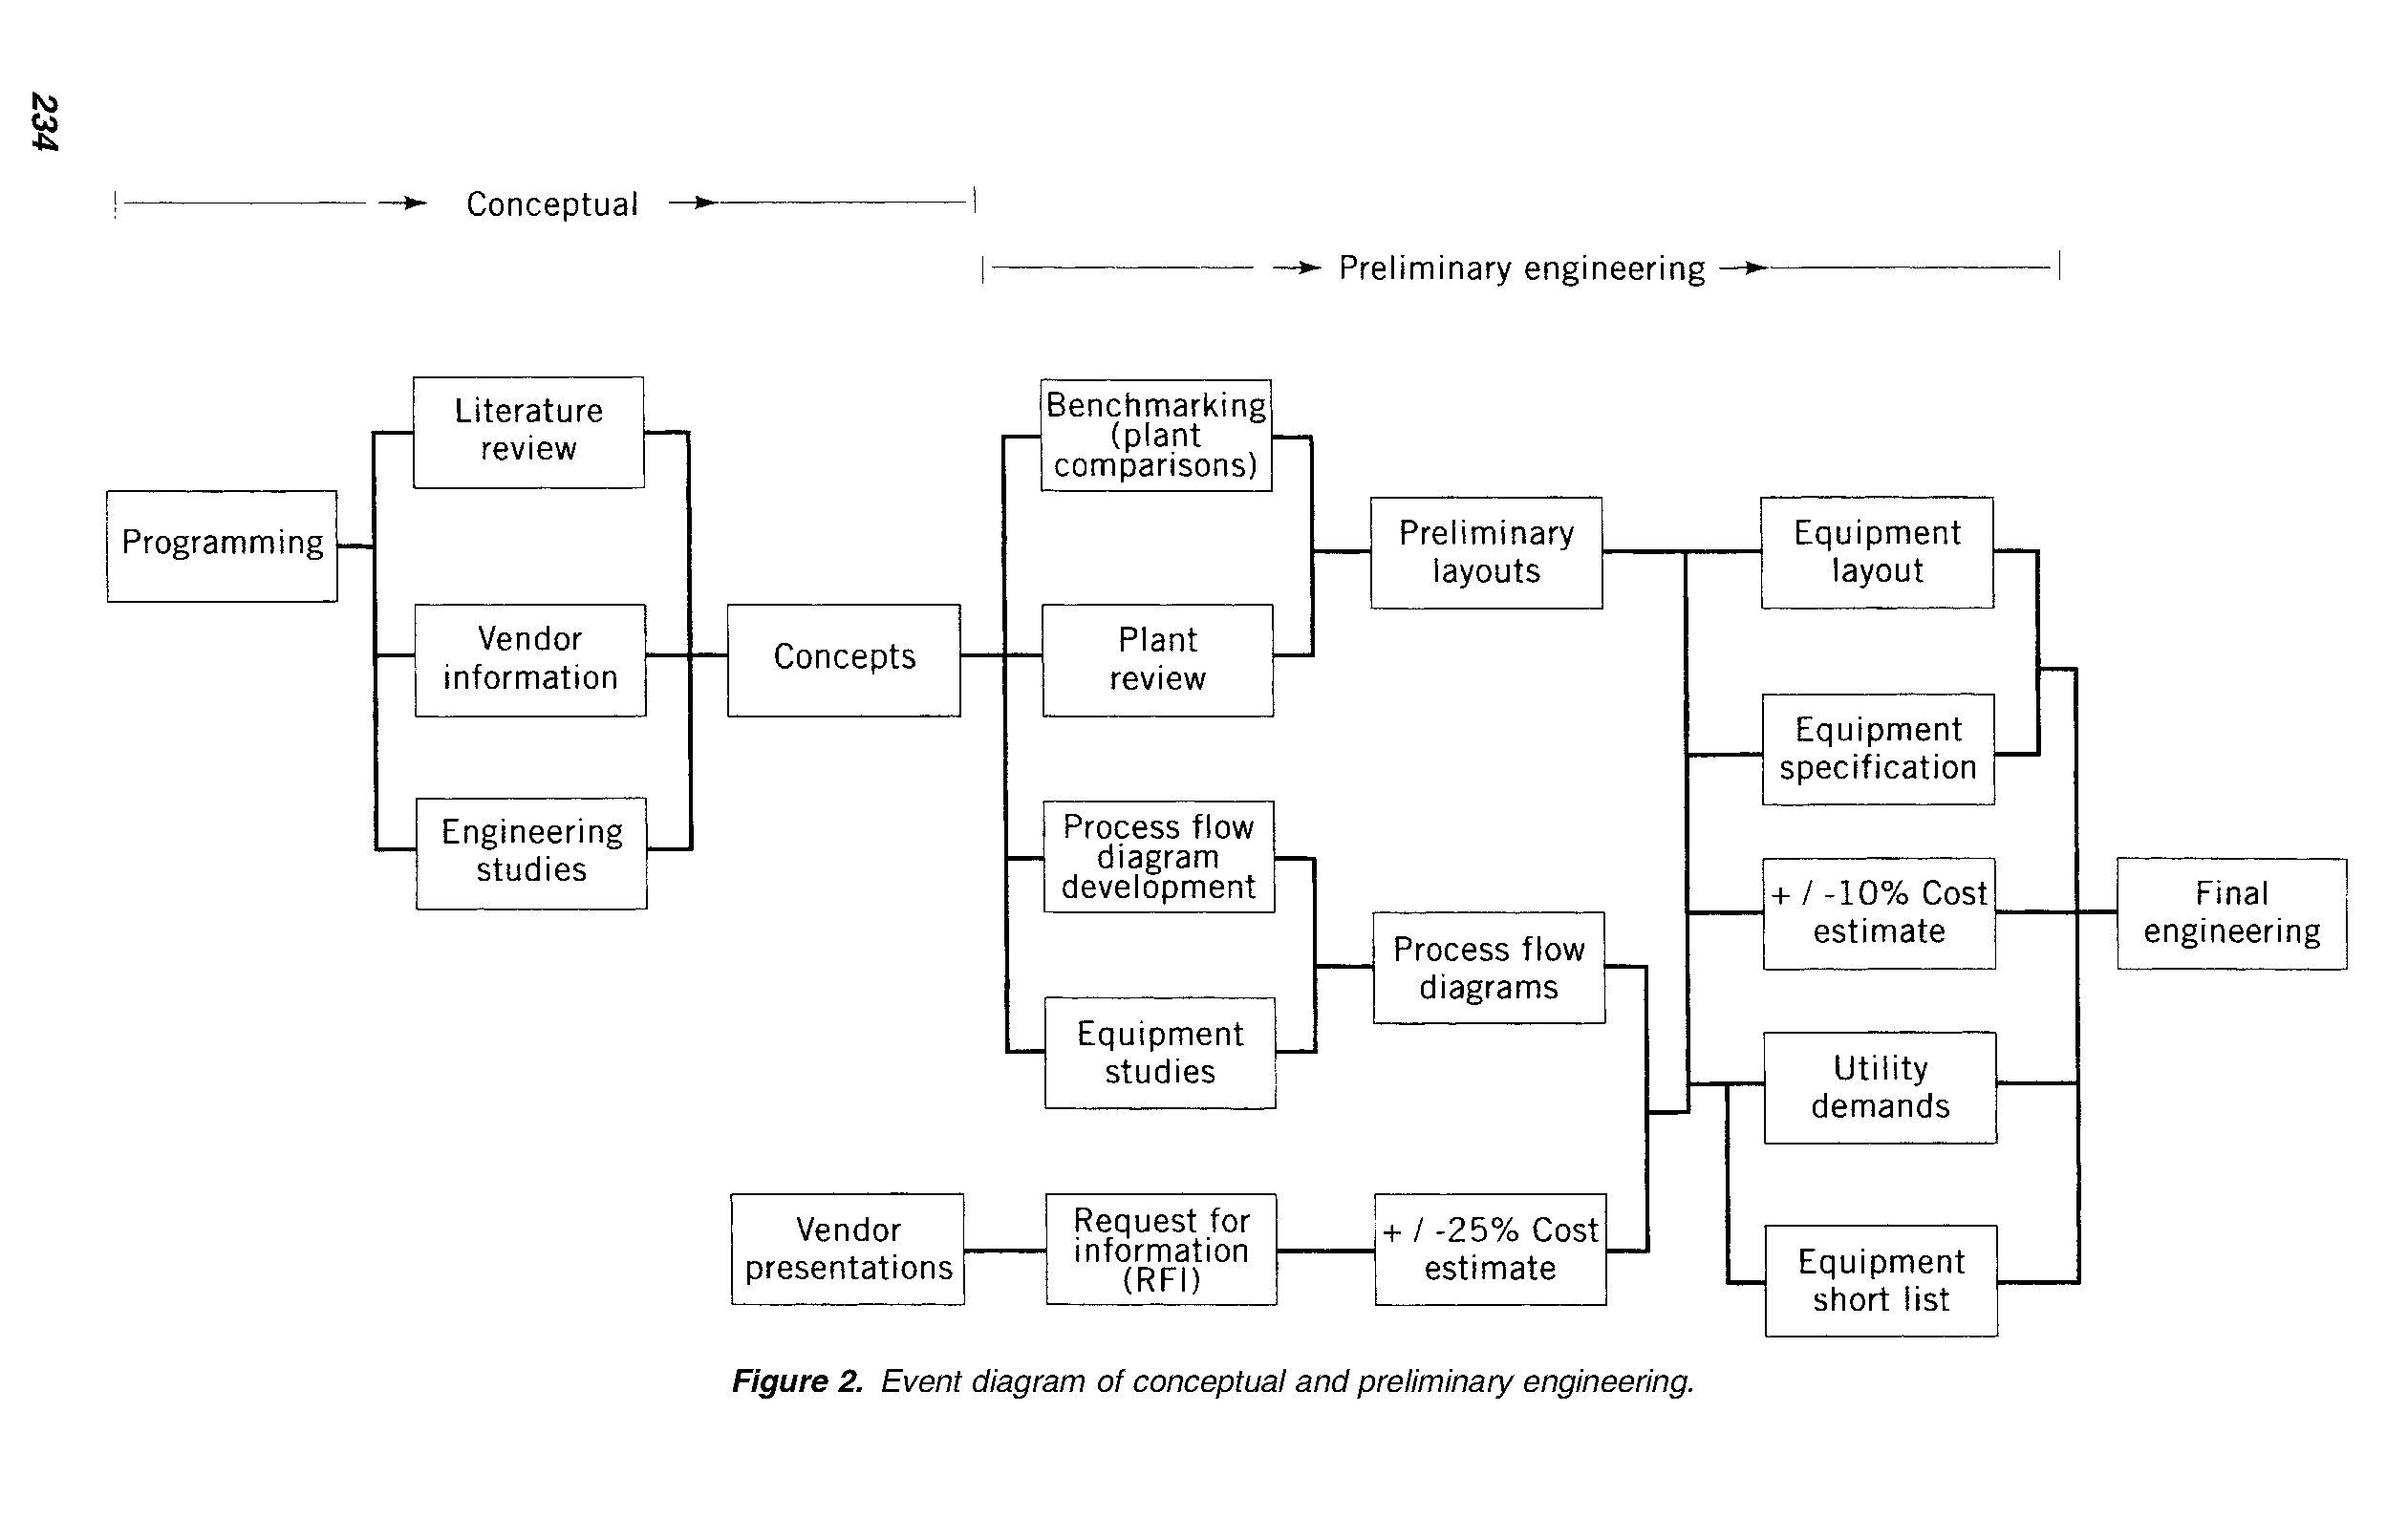 Figure 2. Event diagram of conceptual and preliminary engineering.